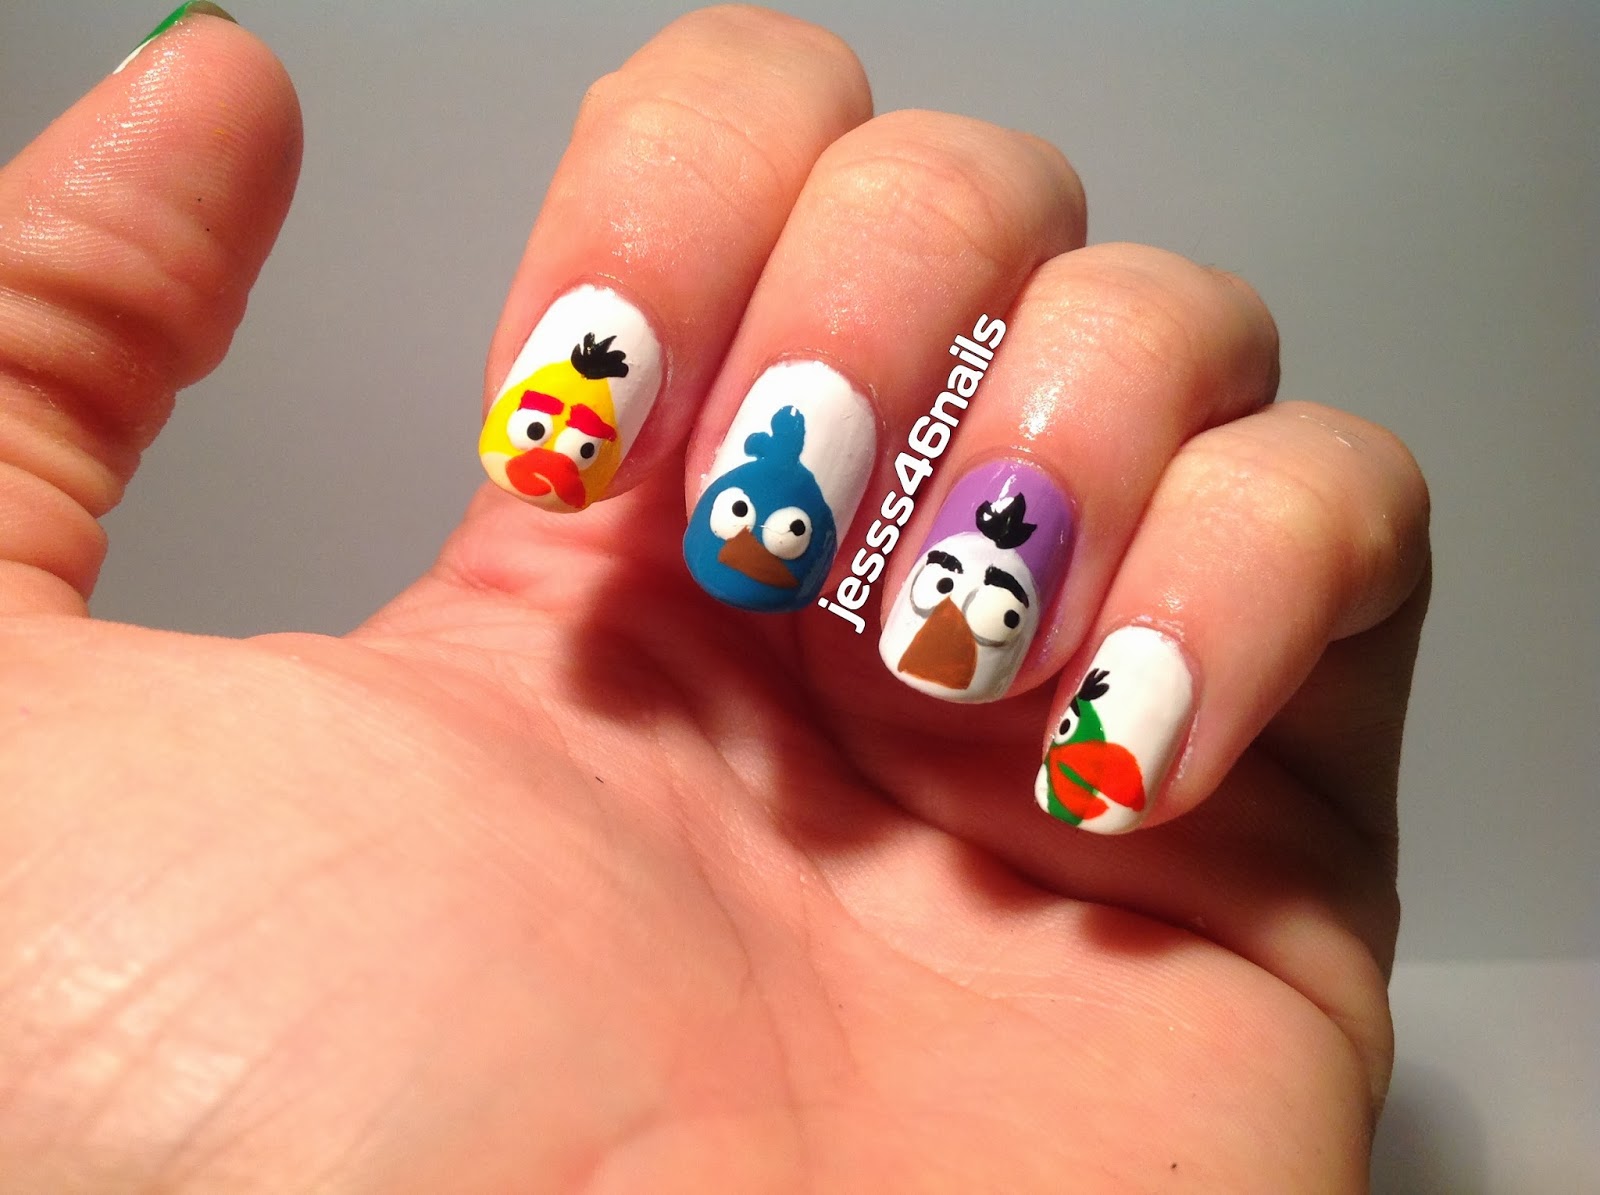 1. Angry Birds Nail Art Tutorial - wide 5